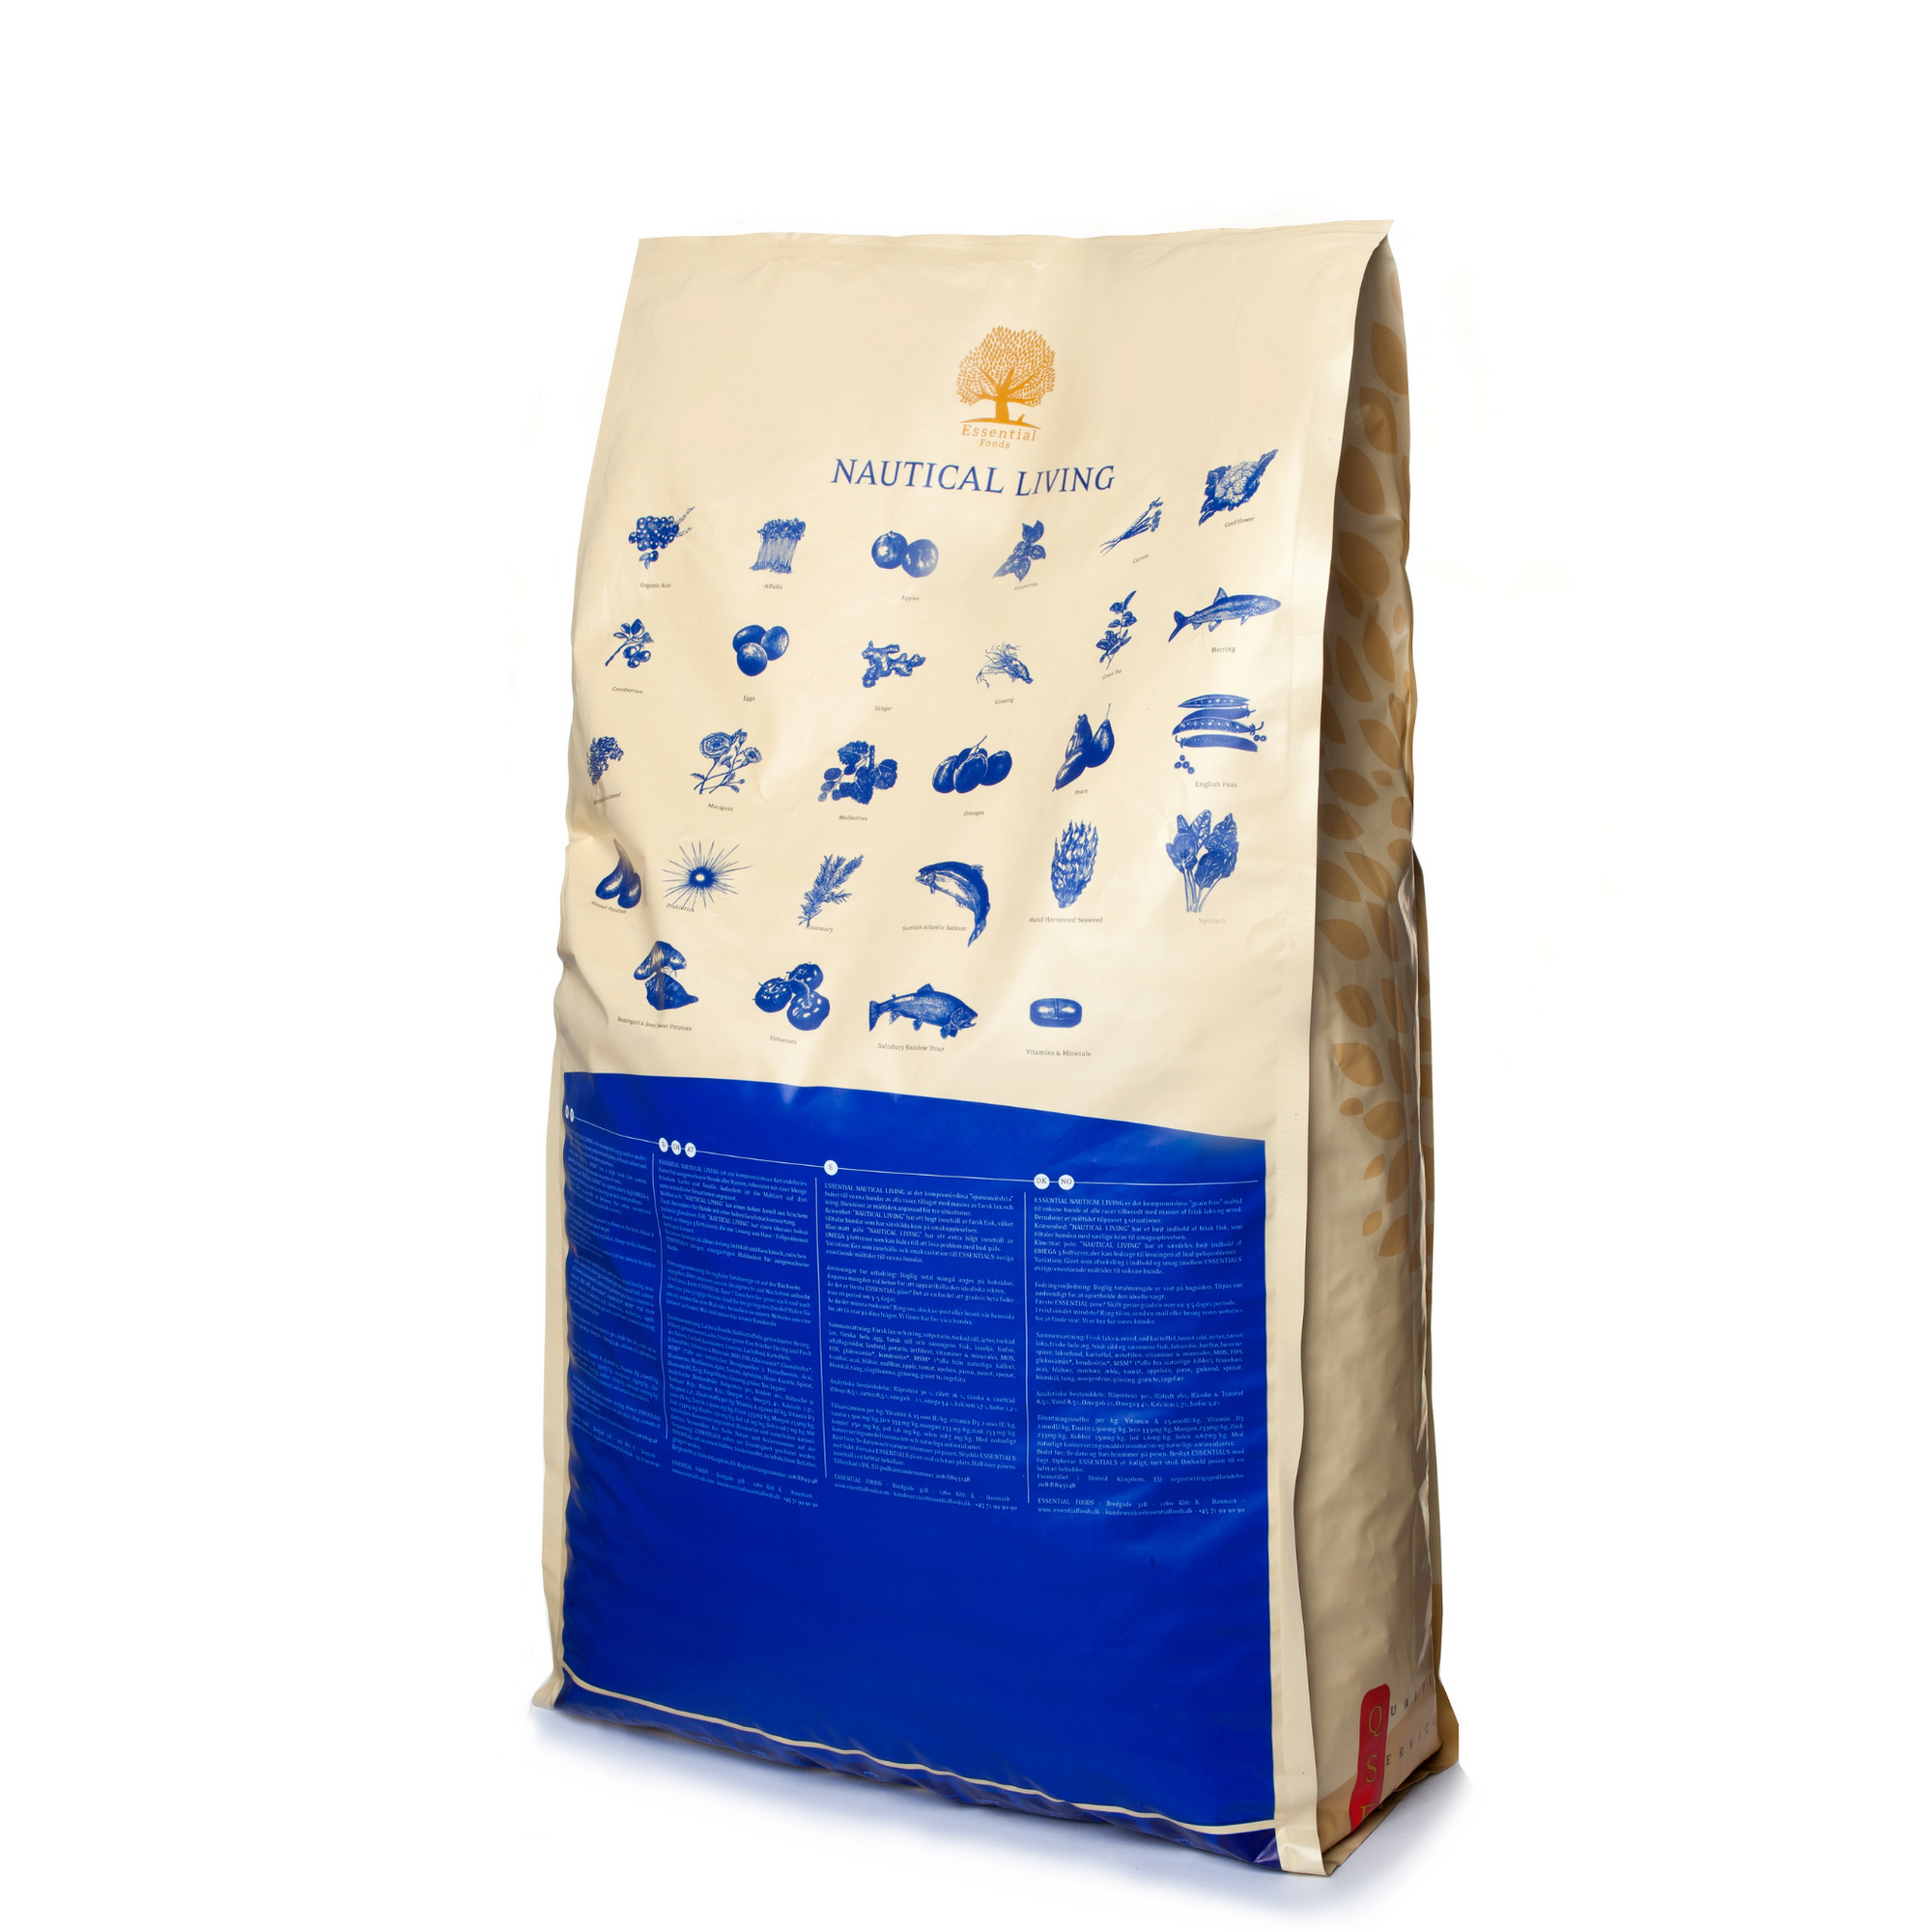 77% Scottish salmon, trout, herring, seasonal fish, eggs Super premium grainless food for adult dogs weighing over 15kg NAUTICAL LIVING